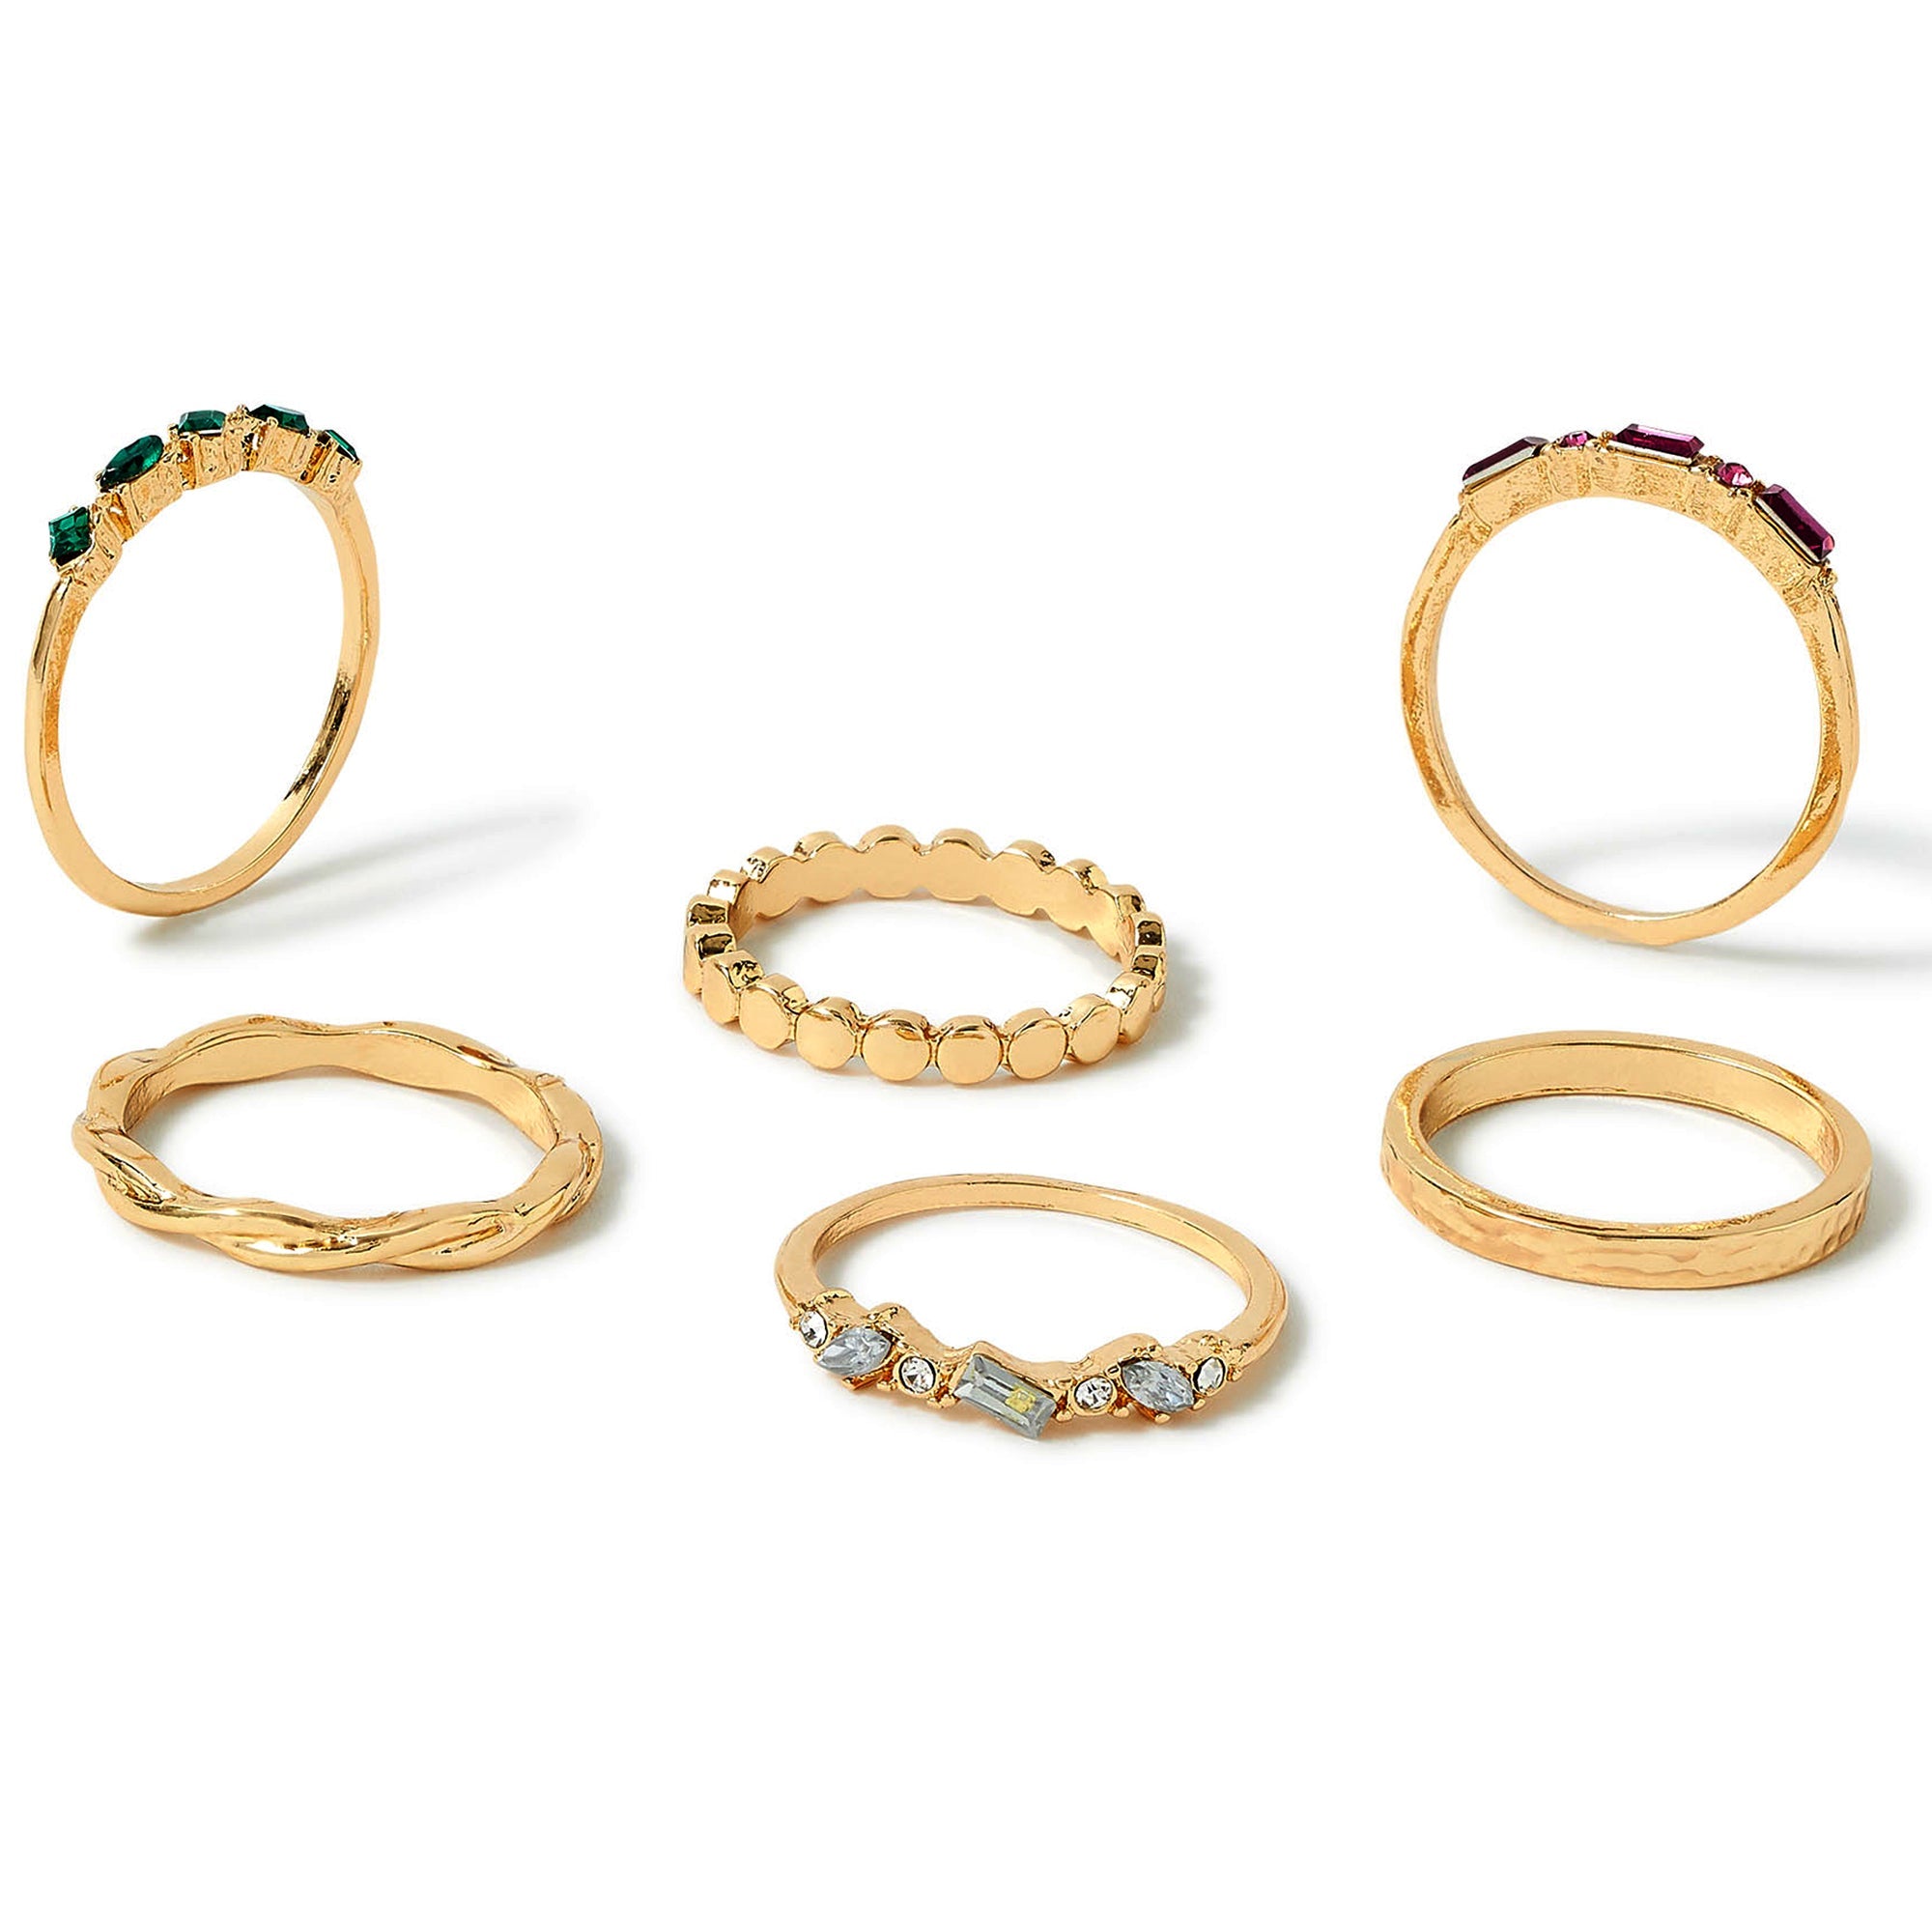 Accessorize London Women's Willoe 6 set of Gems & Pearls Rings-Small